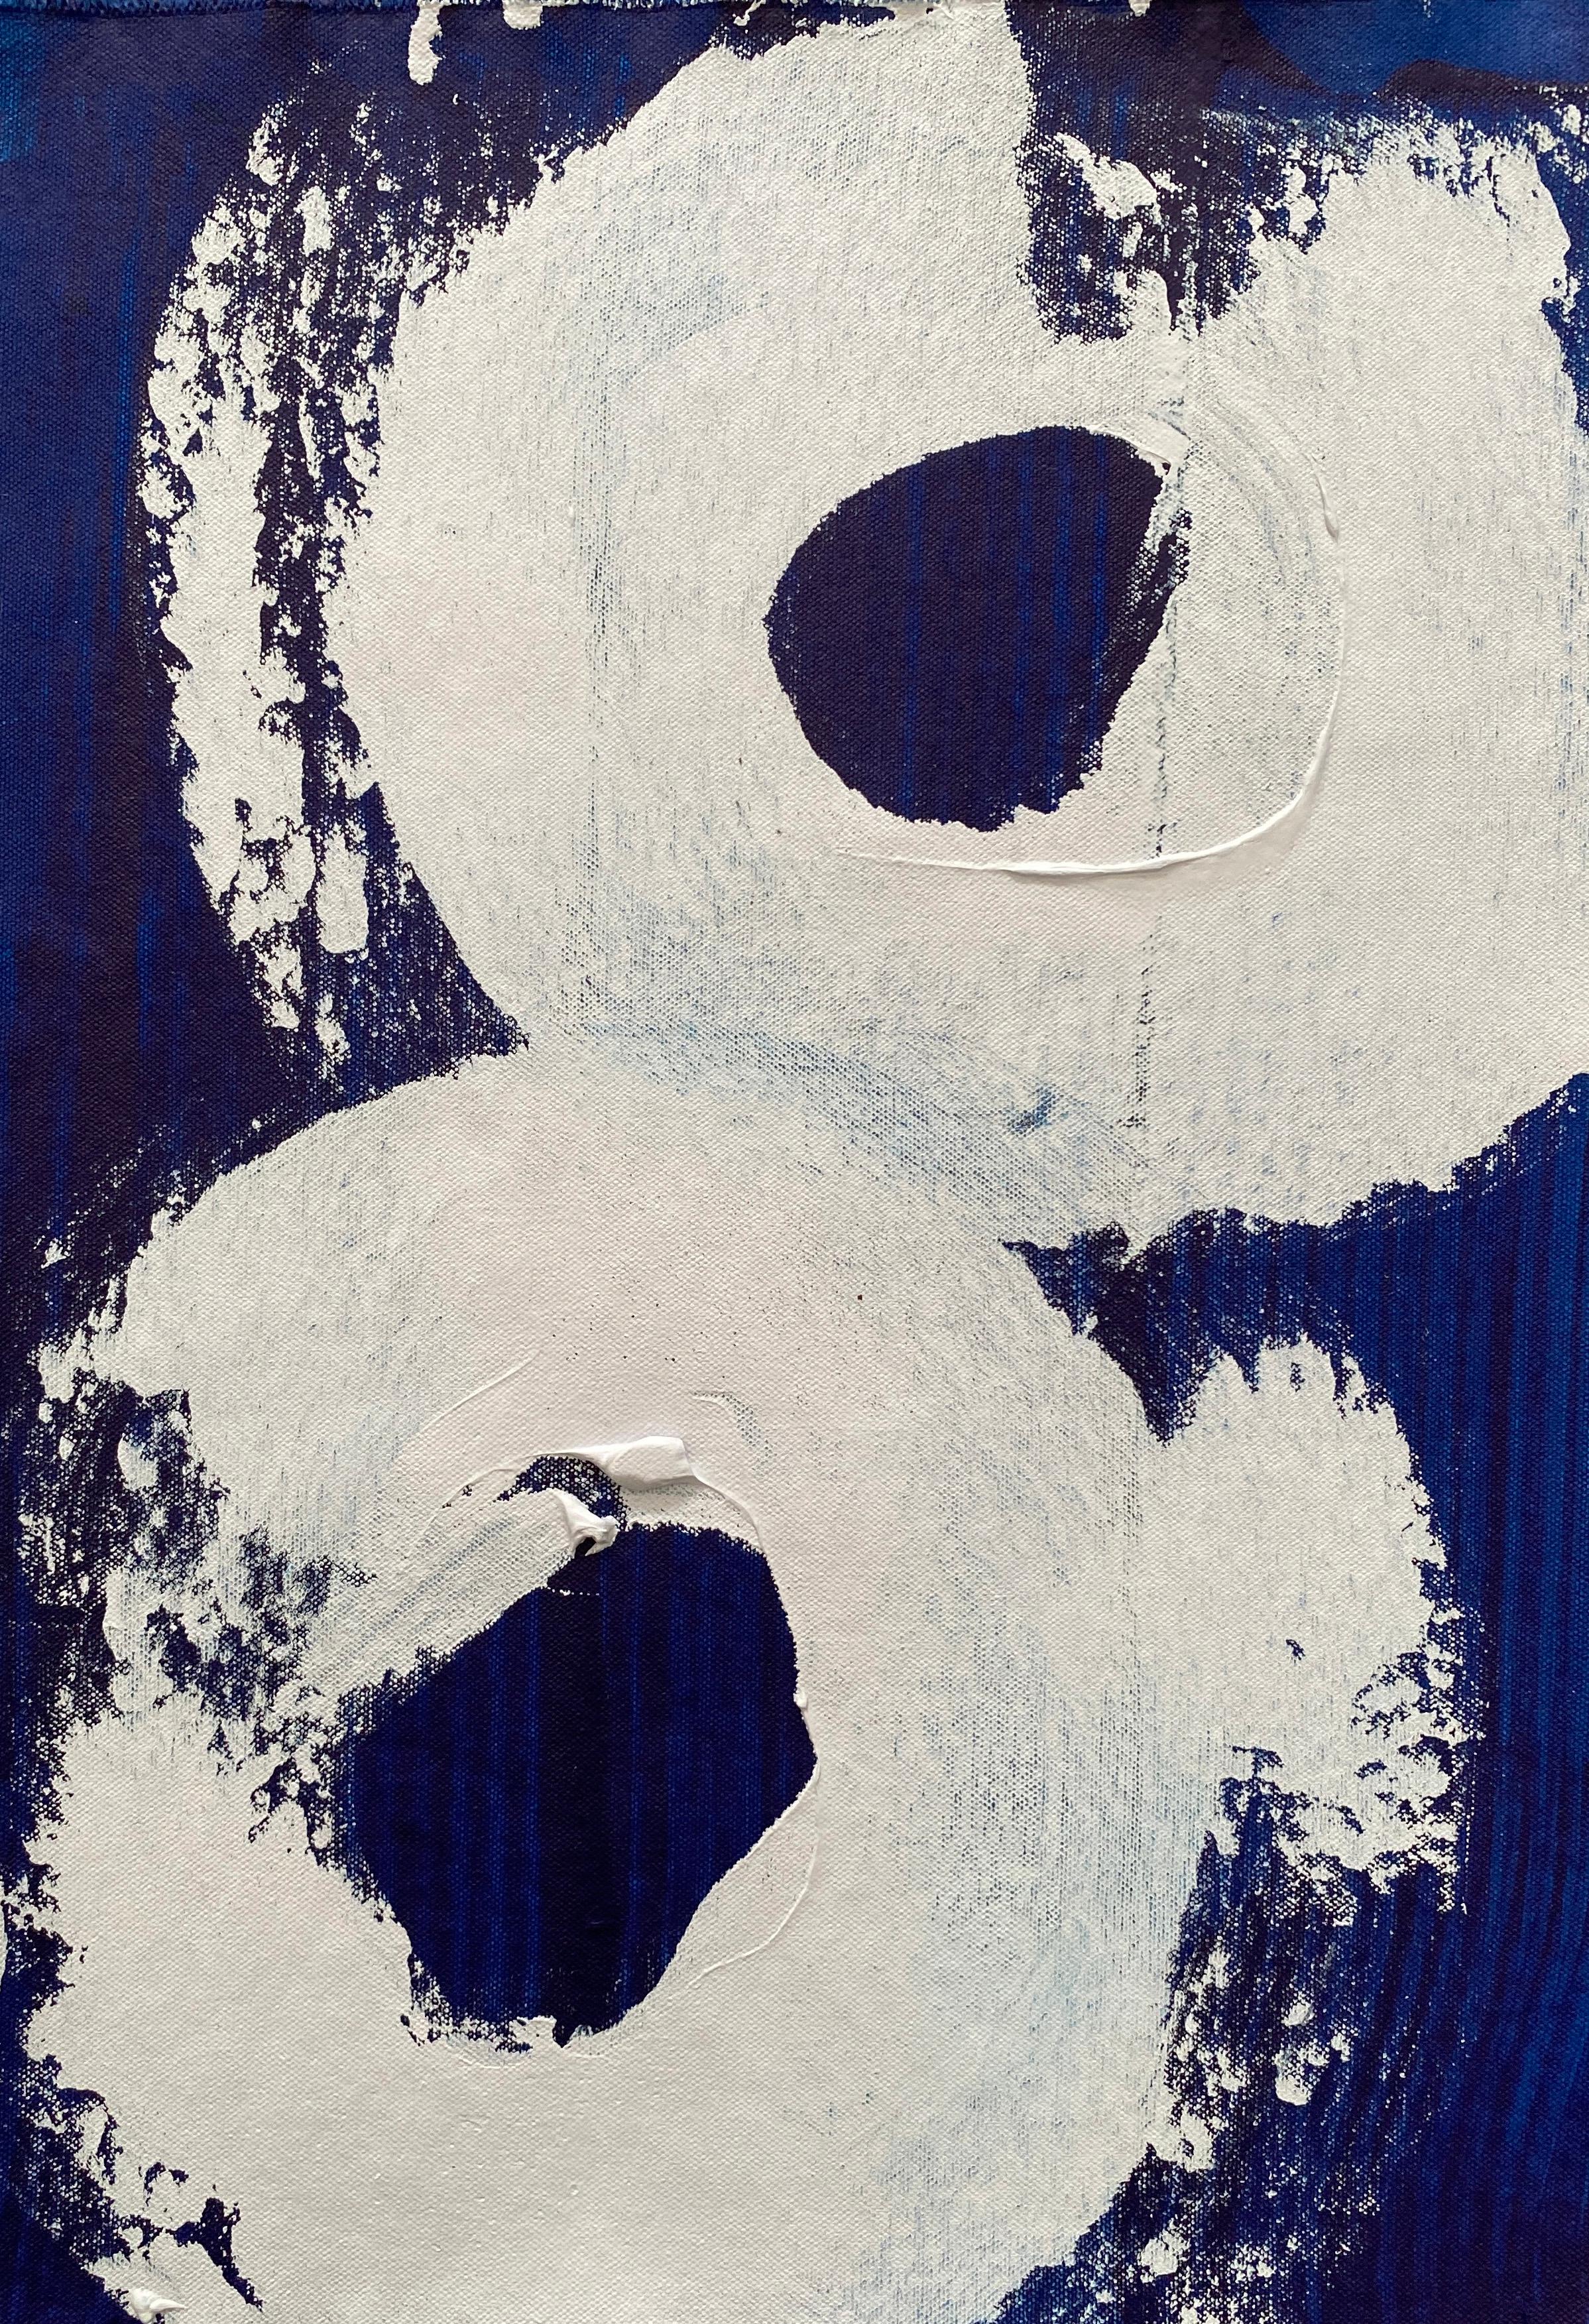 Minimalist Abstract Symbols grey white swirls circles painted on deep blue no3 - Painting by Kathleen Rhee